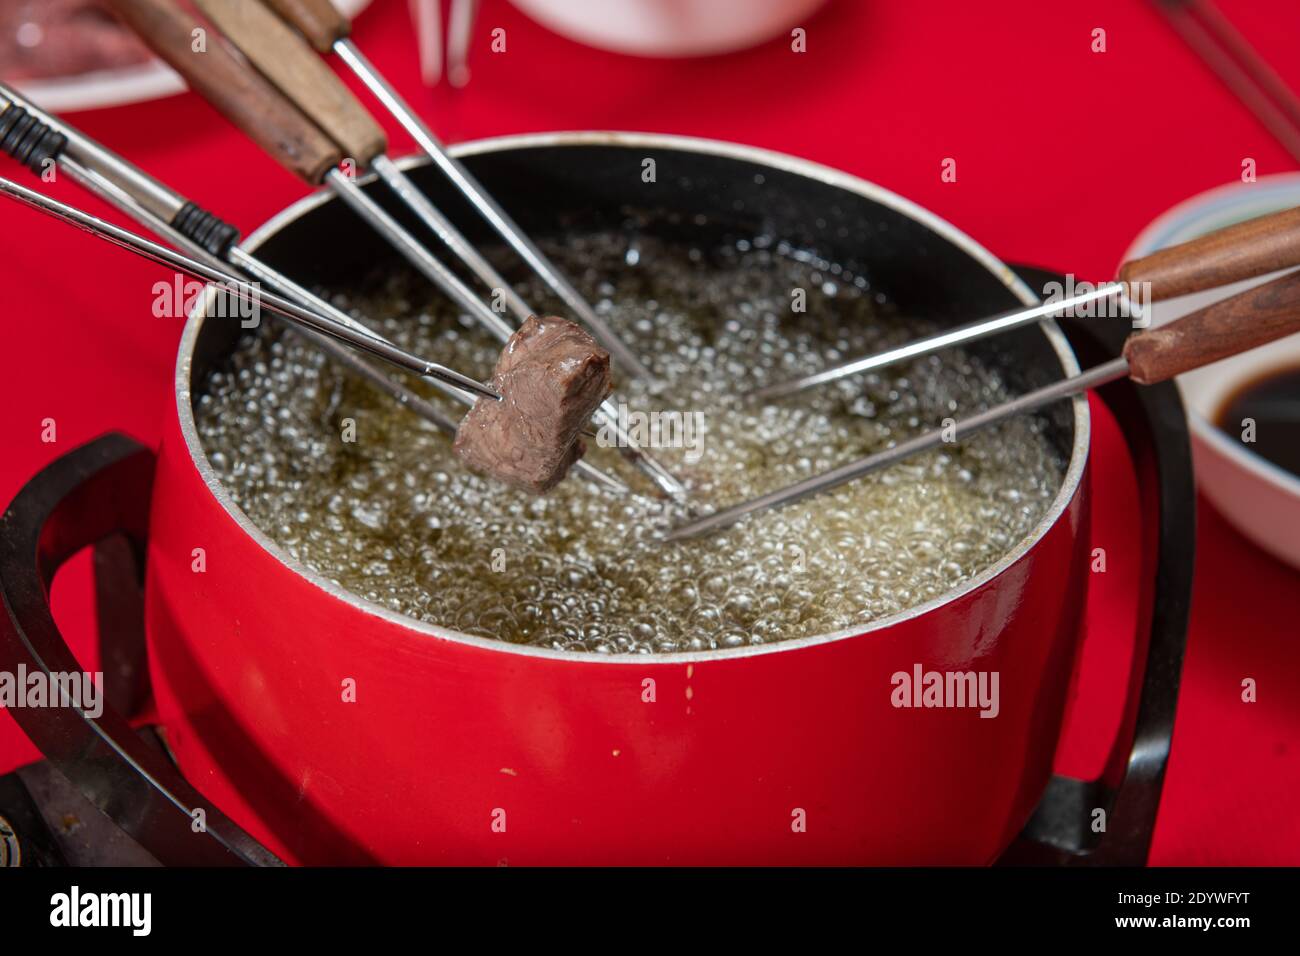 Steak meat cooking in oil at home being done in fondue style. Stock Photo